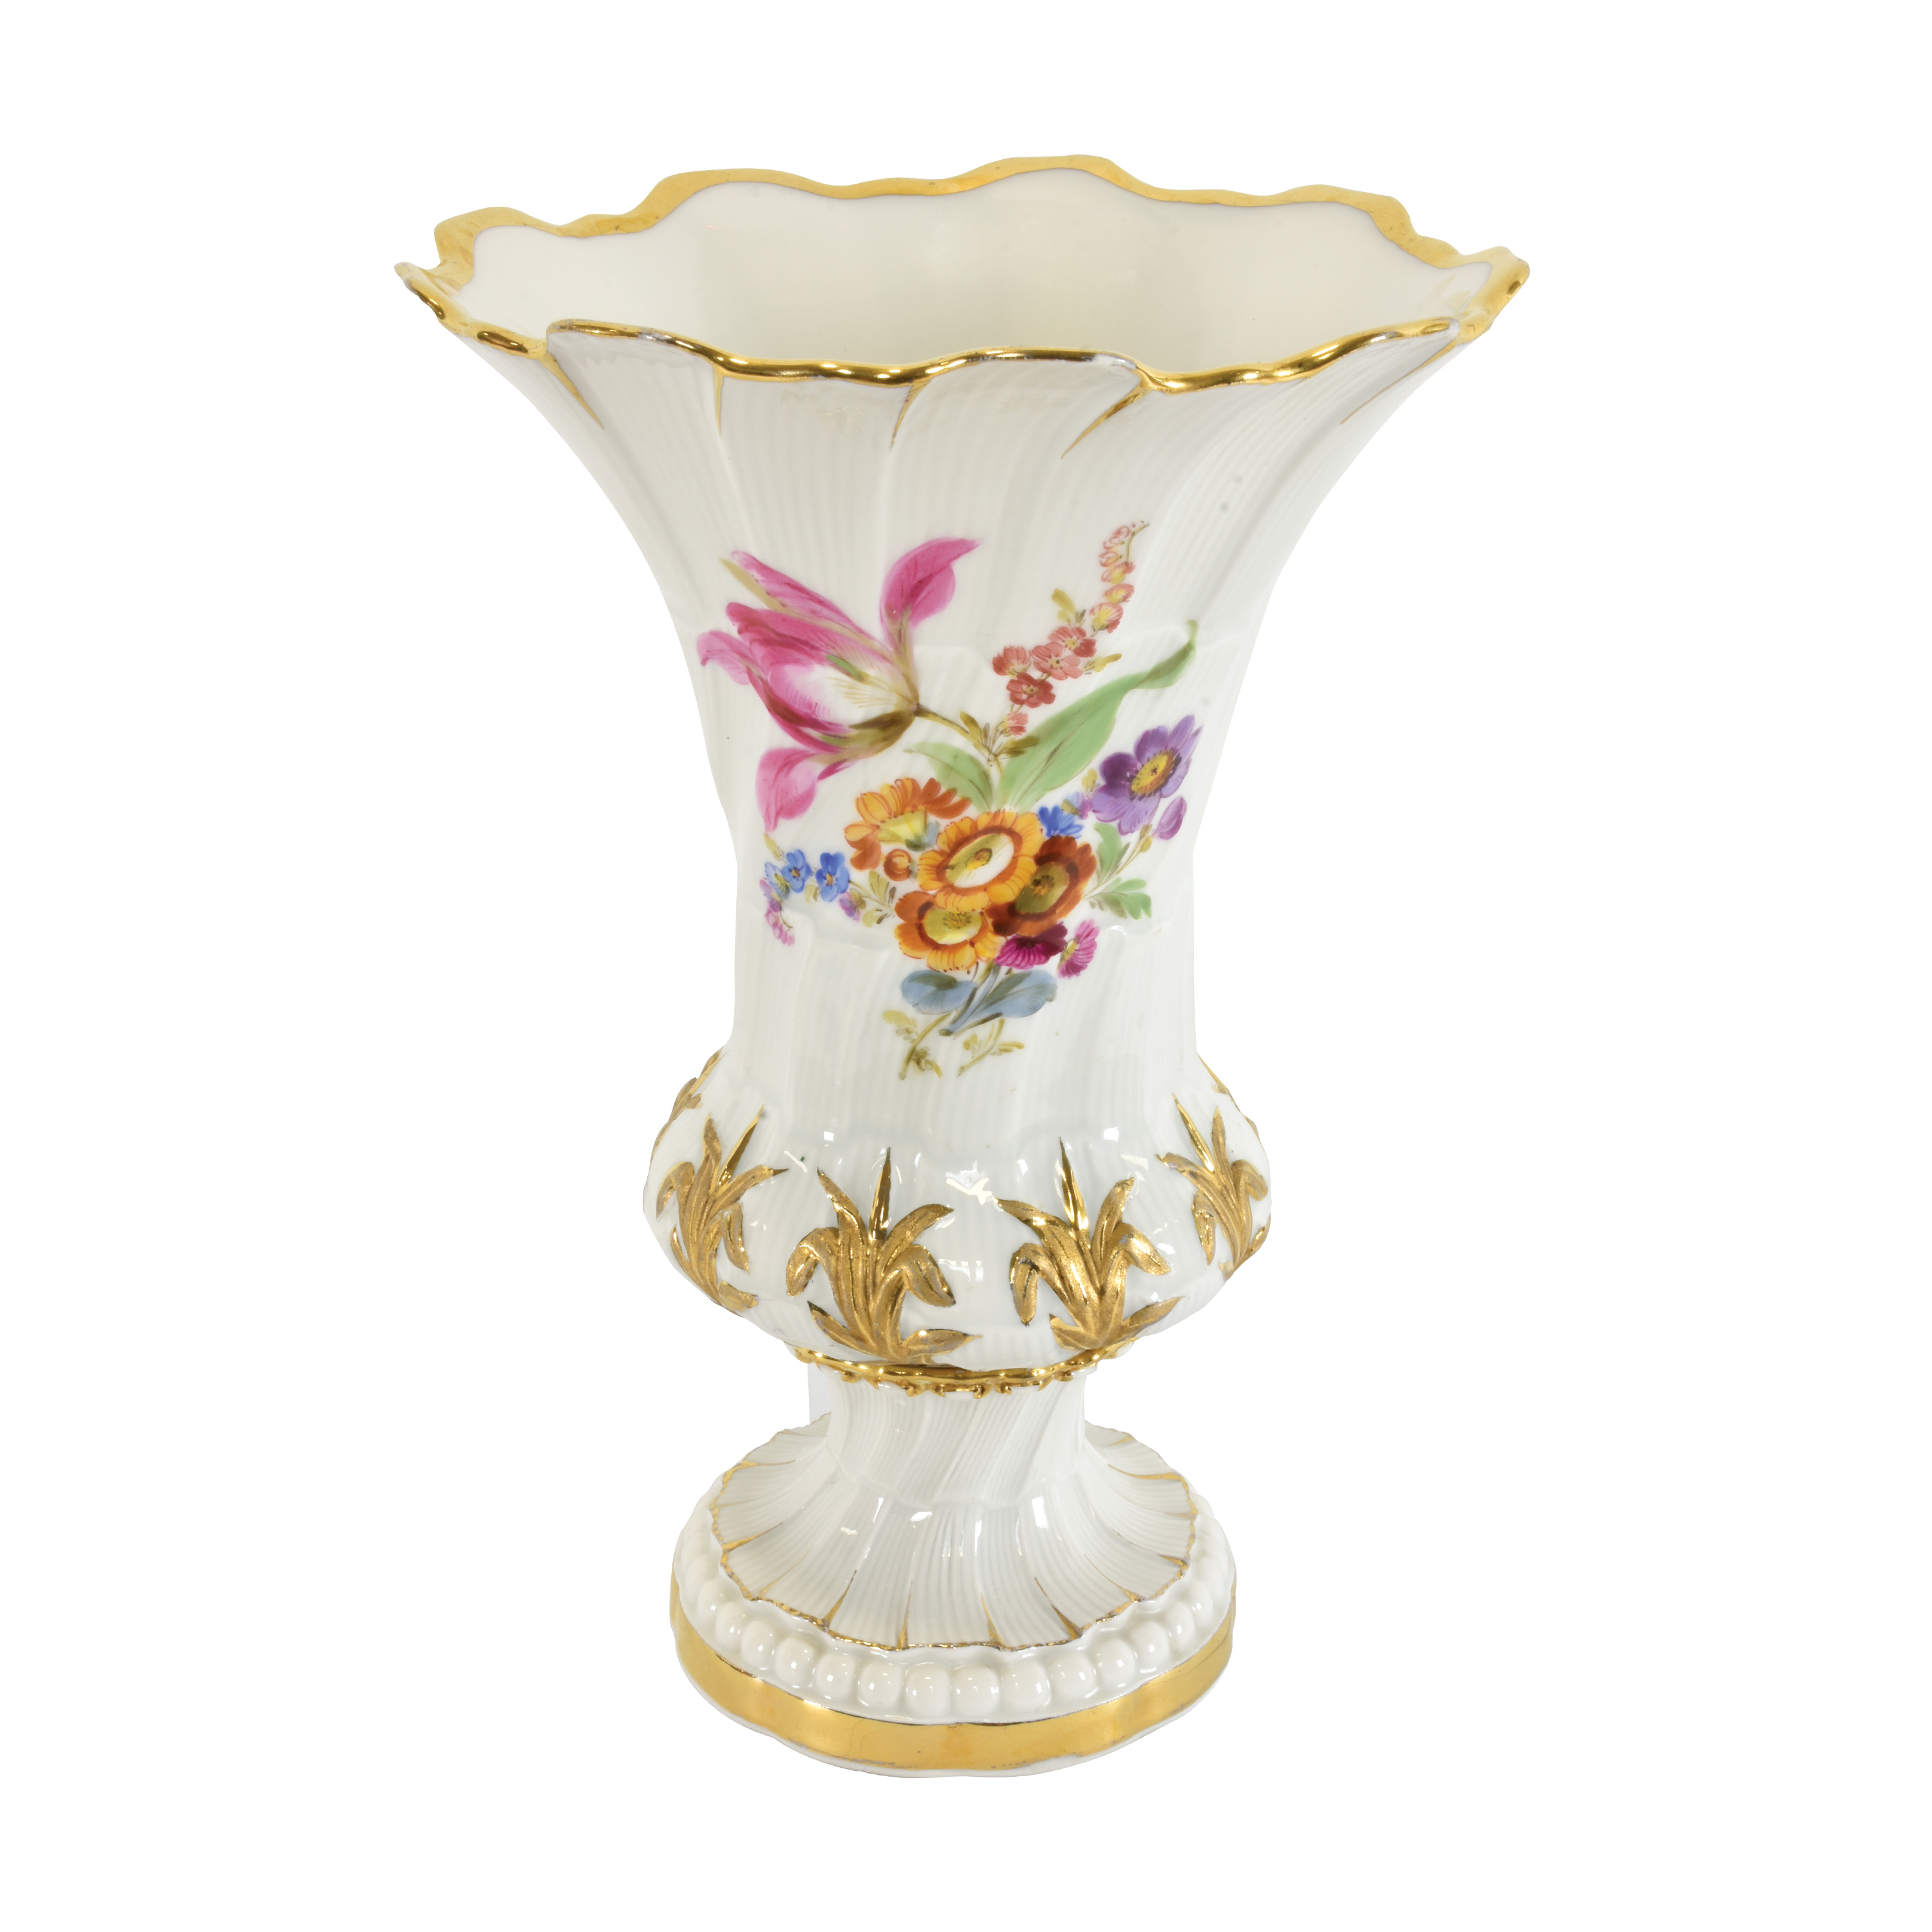 Meissen - A crater vase with shell relief design on base